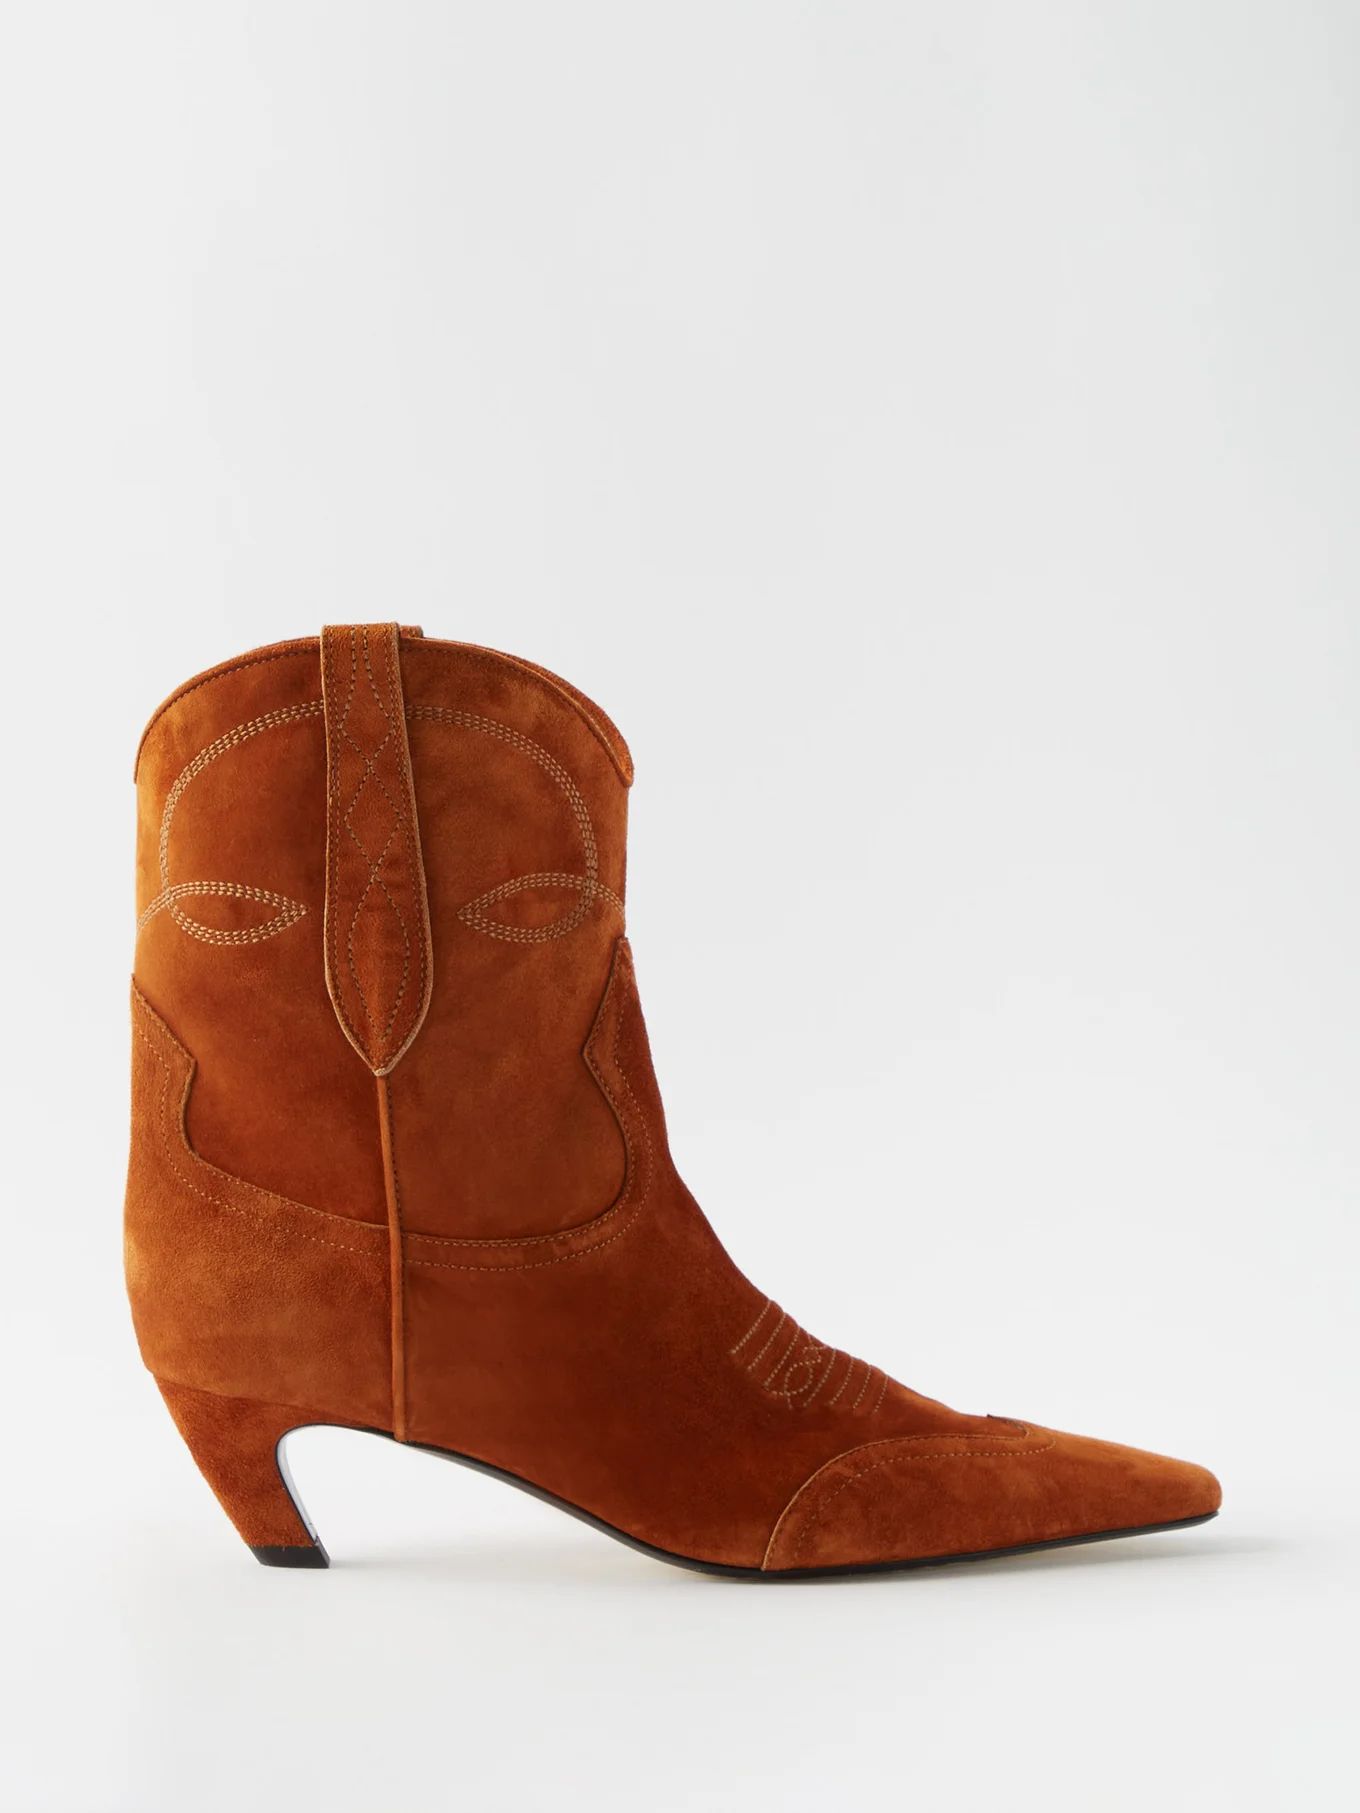 Dallas pointed-toe suede boots | Khaite | Matches (US)